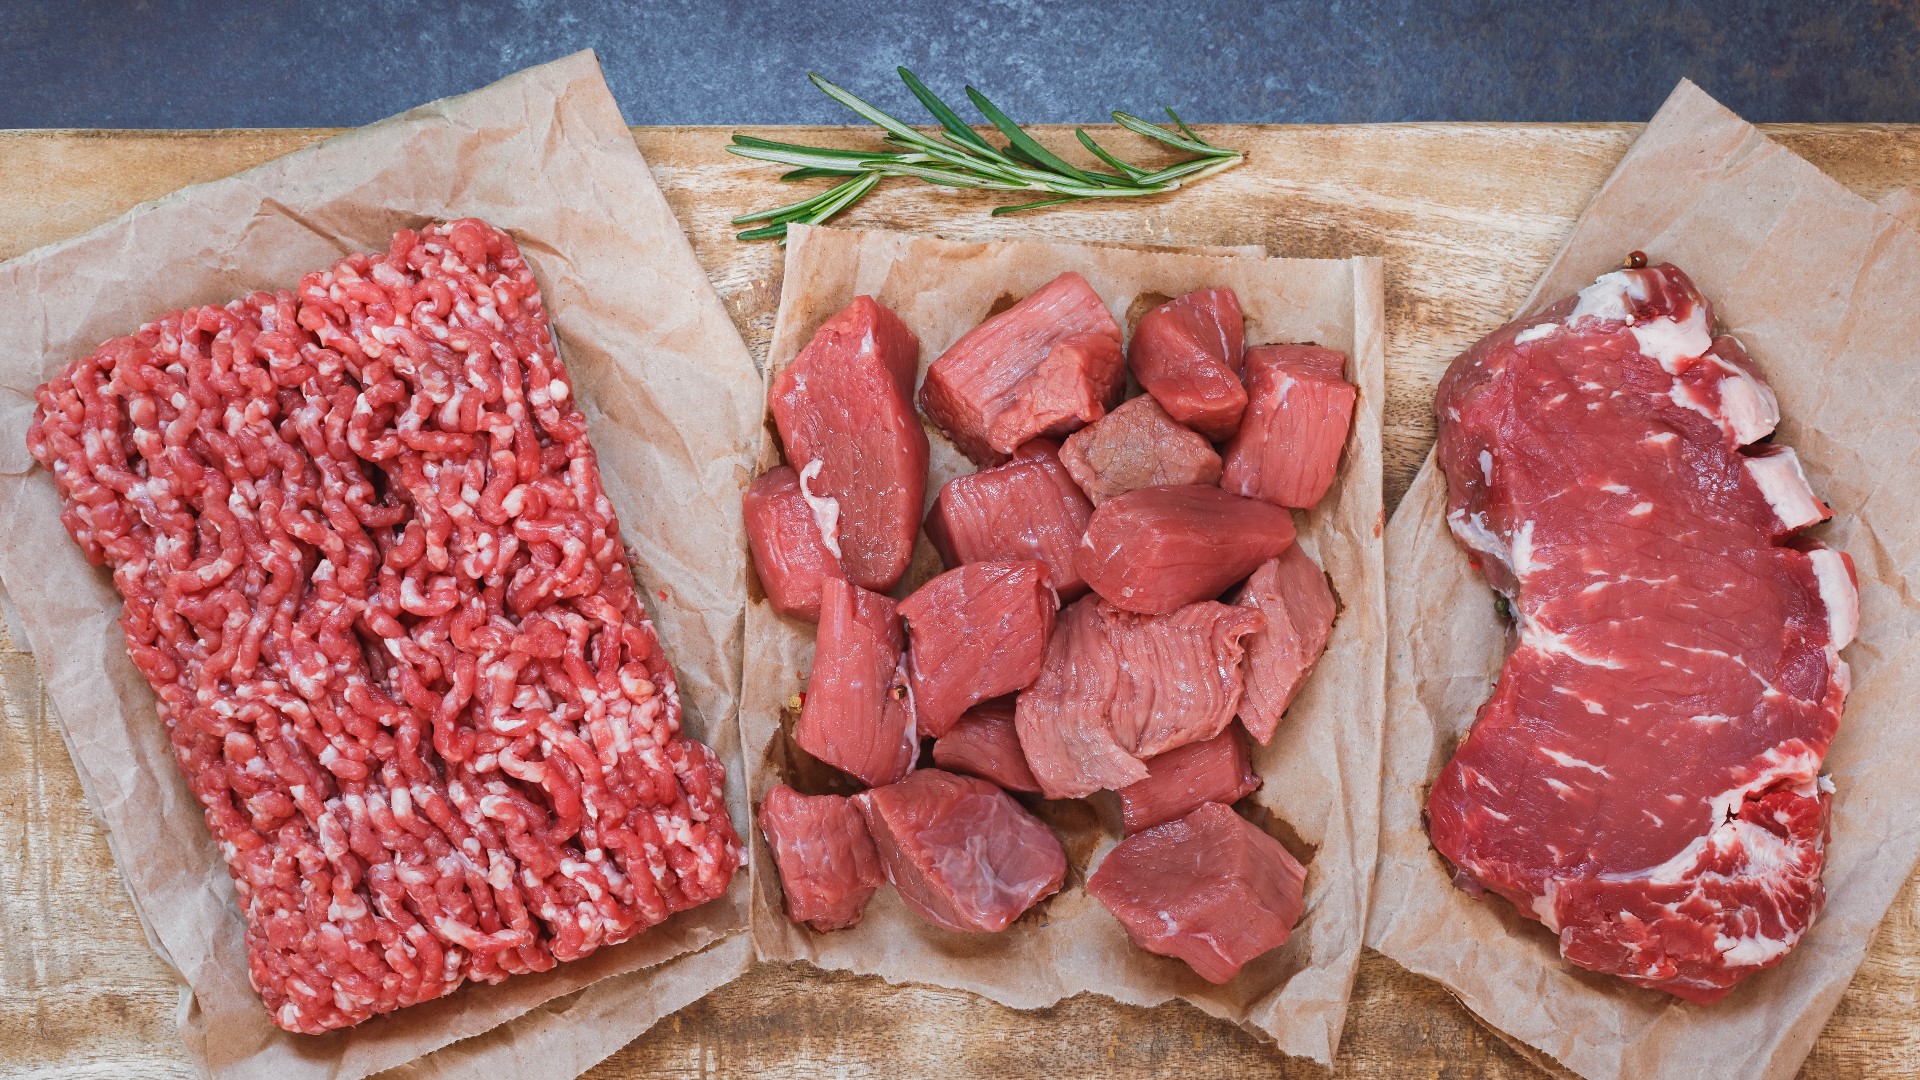 More Than 24 000 Pounds Of Beef Unfit For Human Consumption Recalled